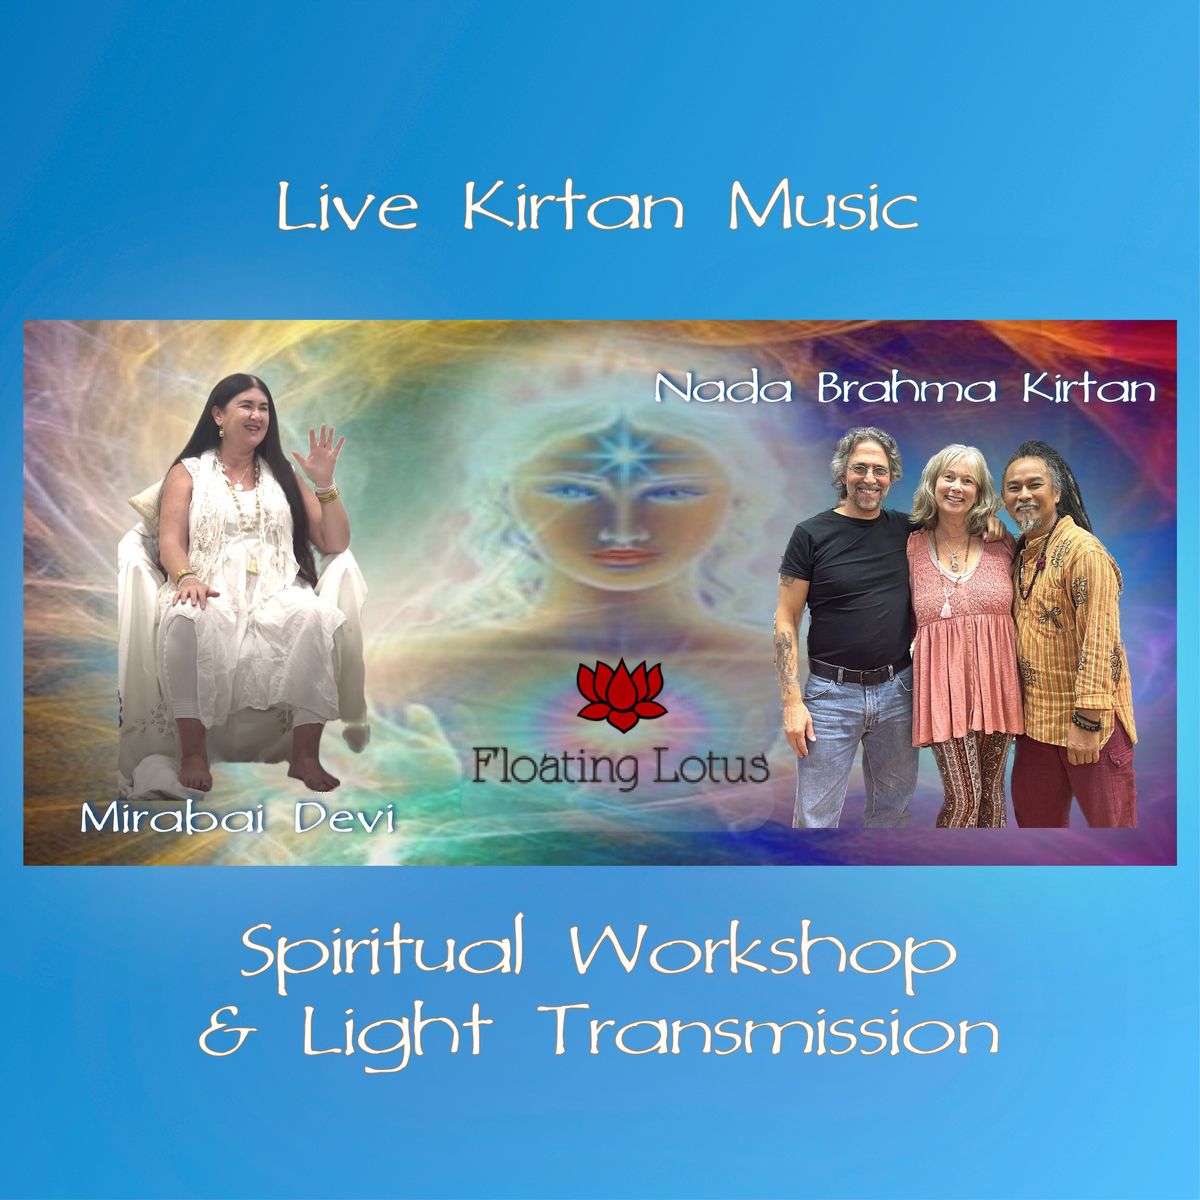 An Evening of Bliss - Kirtan with Nada Brahma and Divine Light Activation\/Teaching with Mirabai Devi